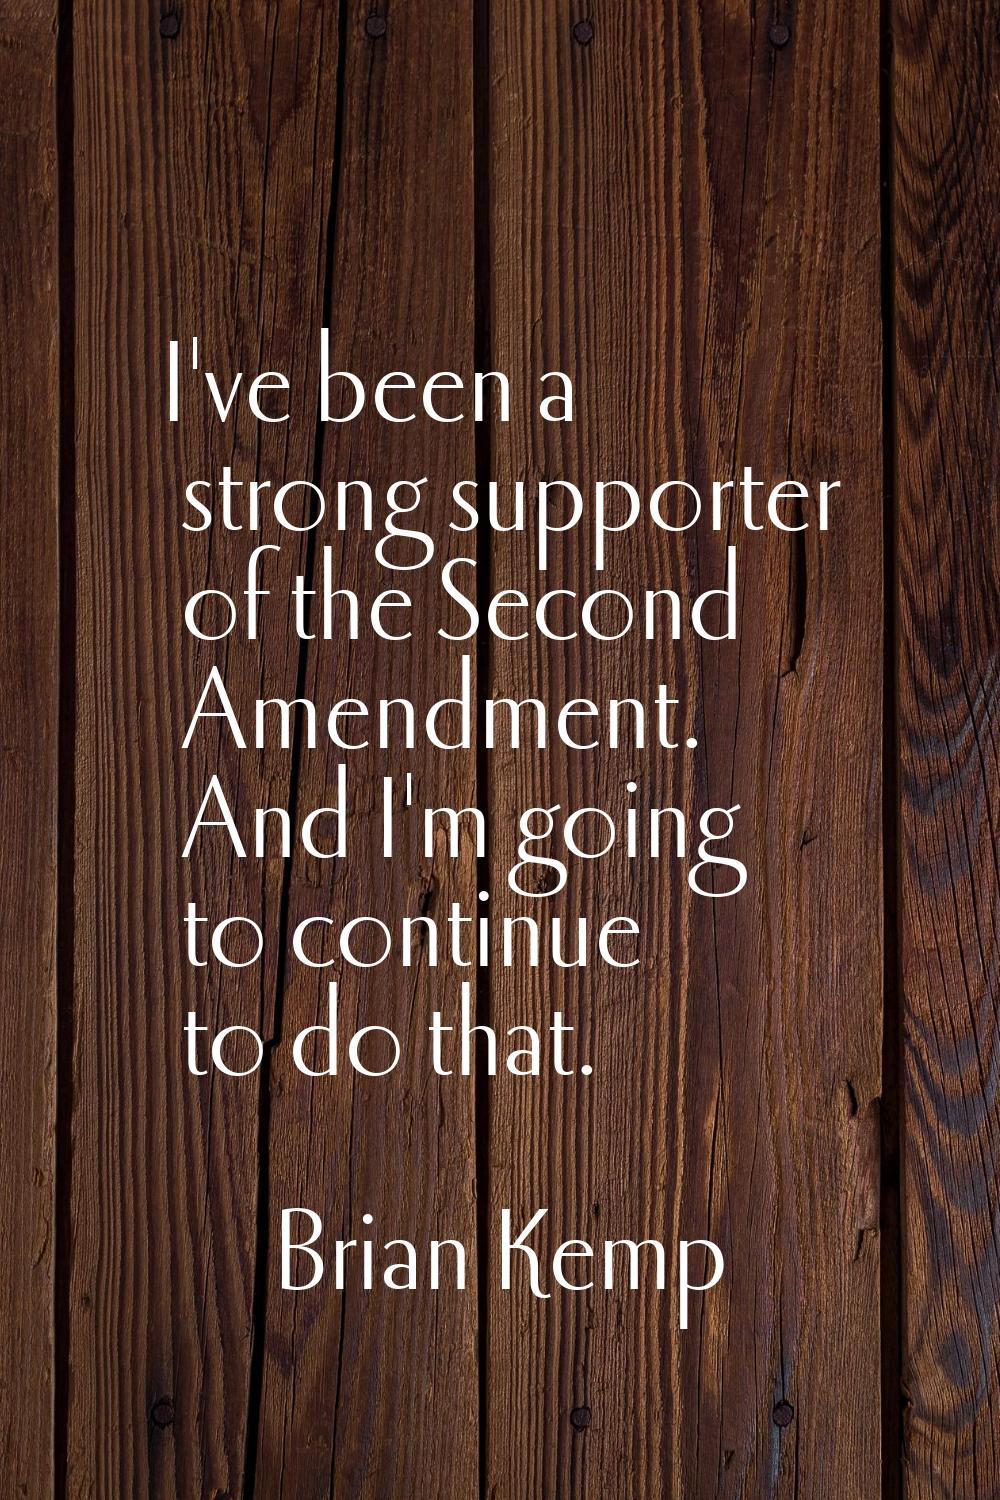 I've been a strong supporter of the Second Amendment. And I'm going to continue to do that.